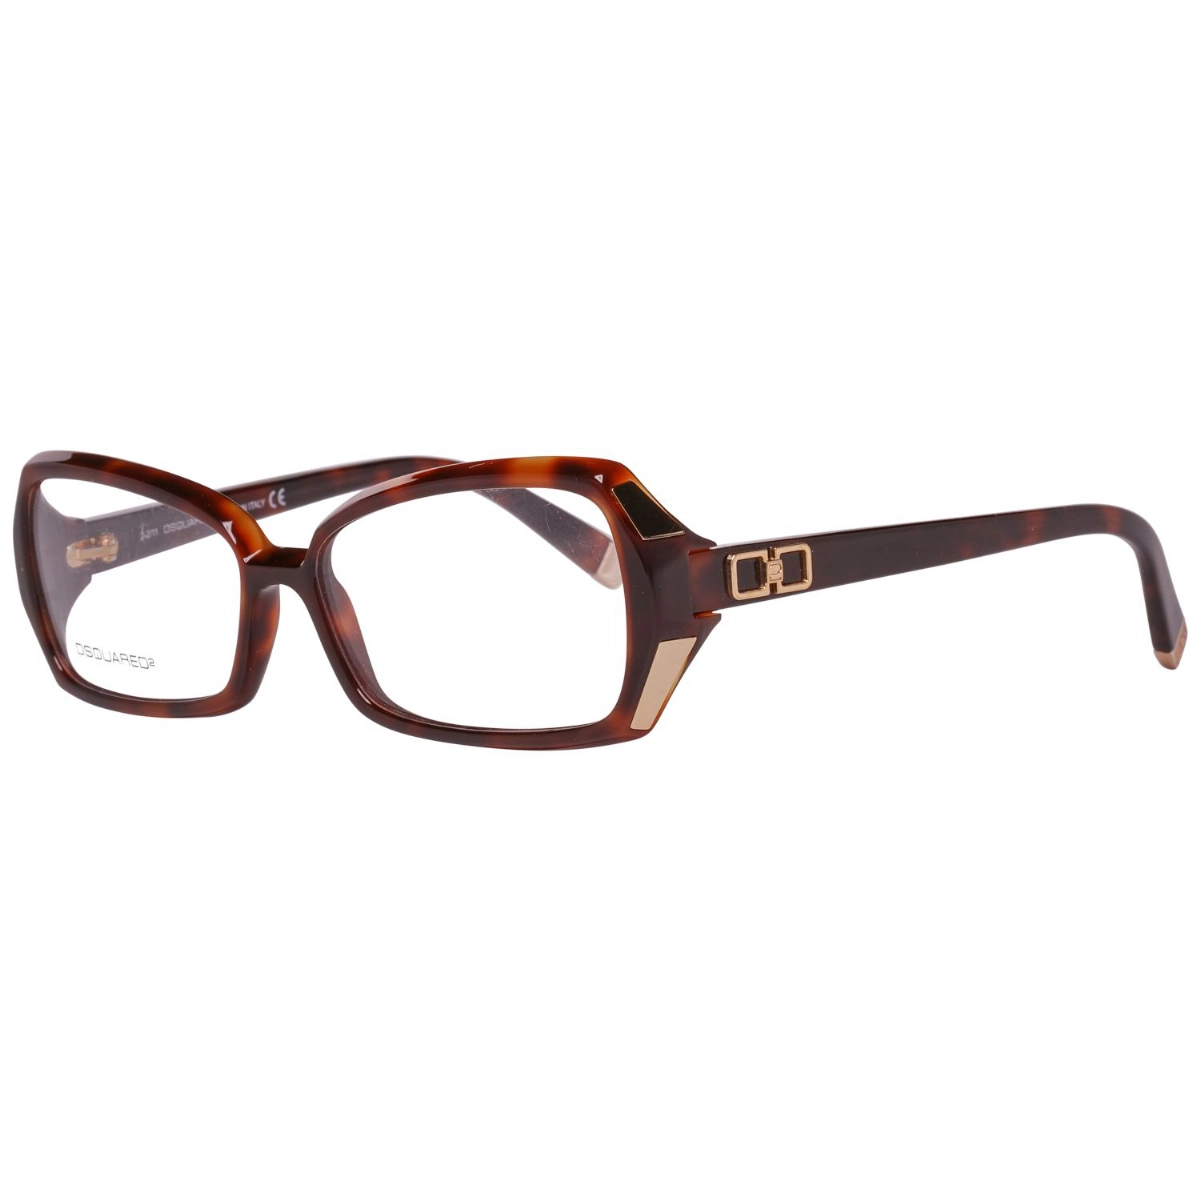 GLASSES FOR WOMAN DSQUARED2 DQ5049-052-54